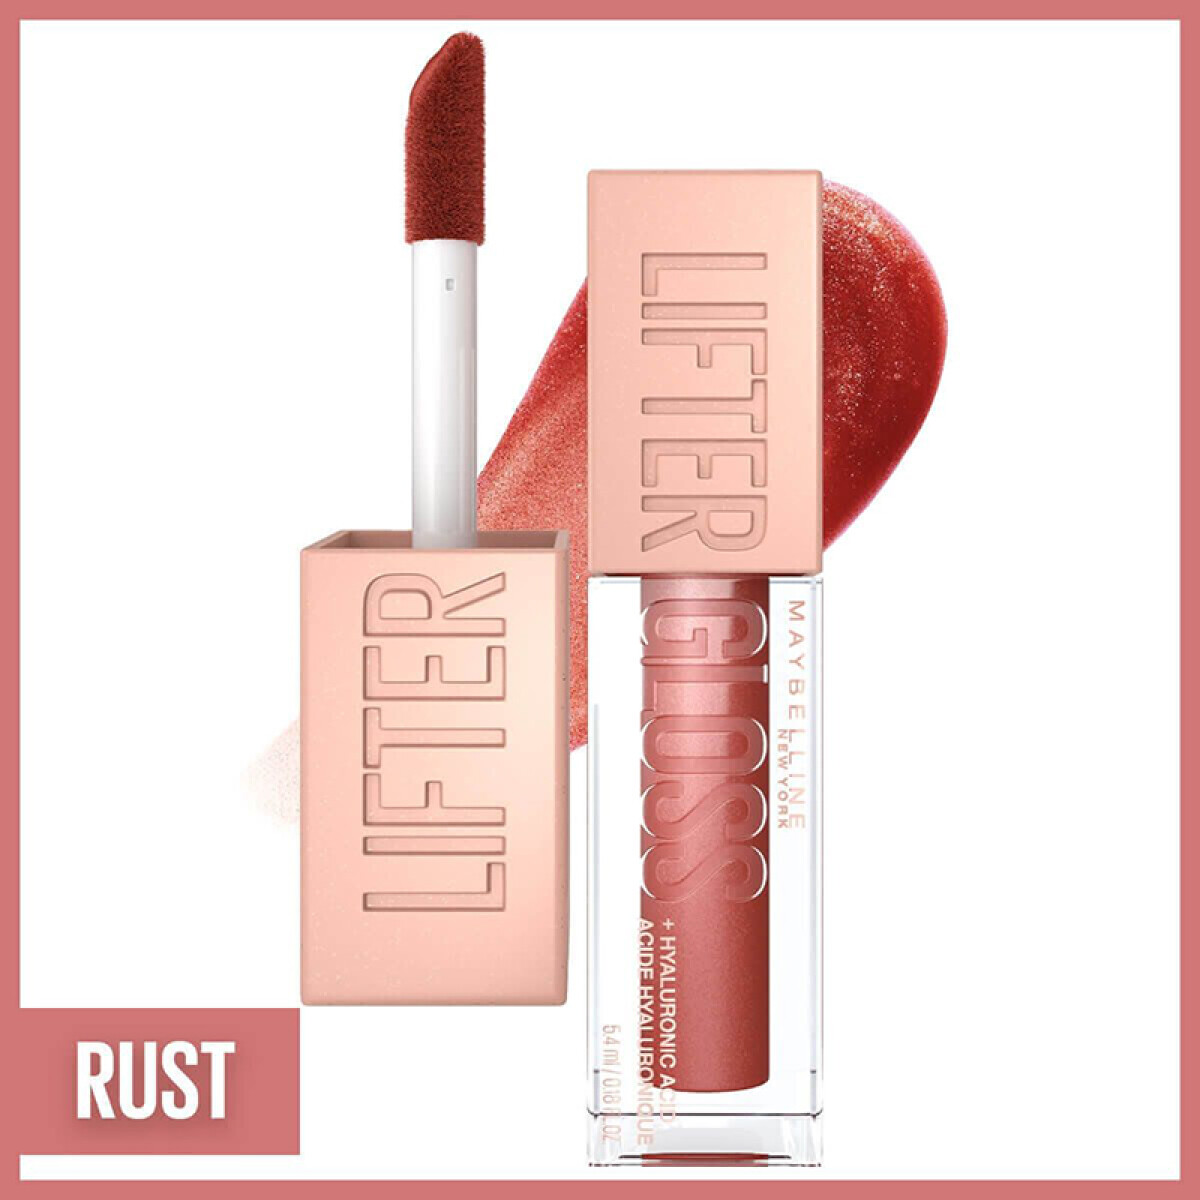 Maybelline gloss lifter - 016 Rust 